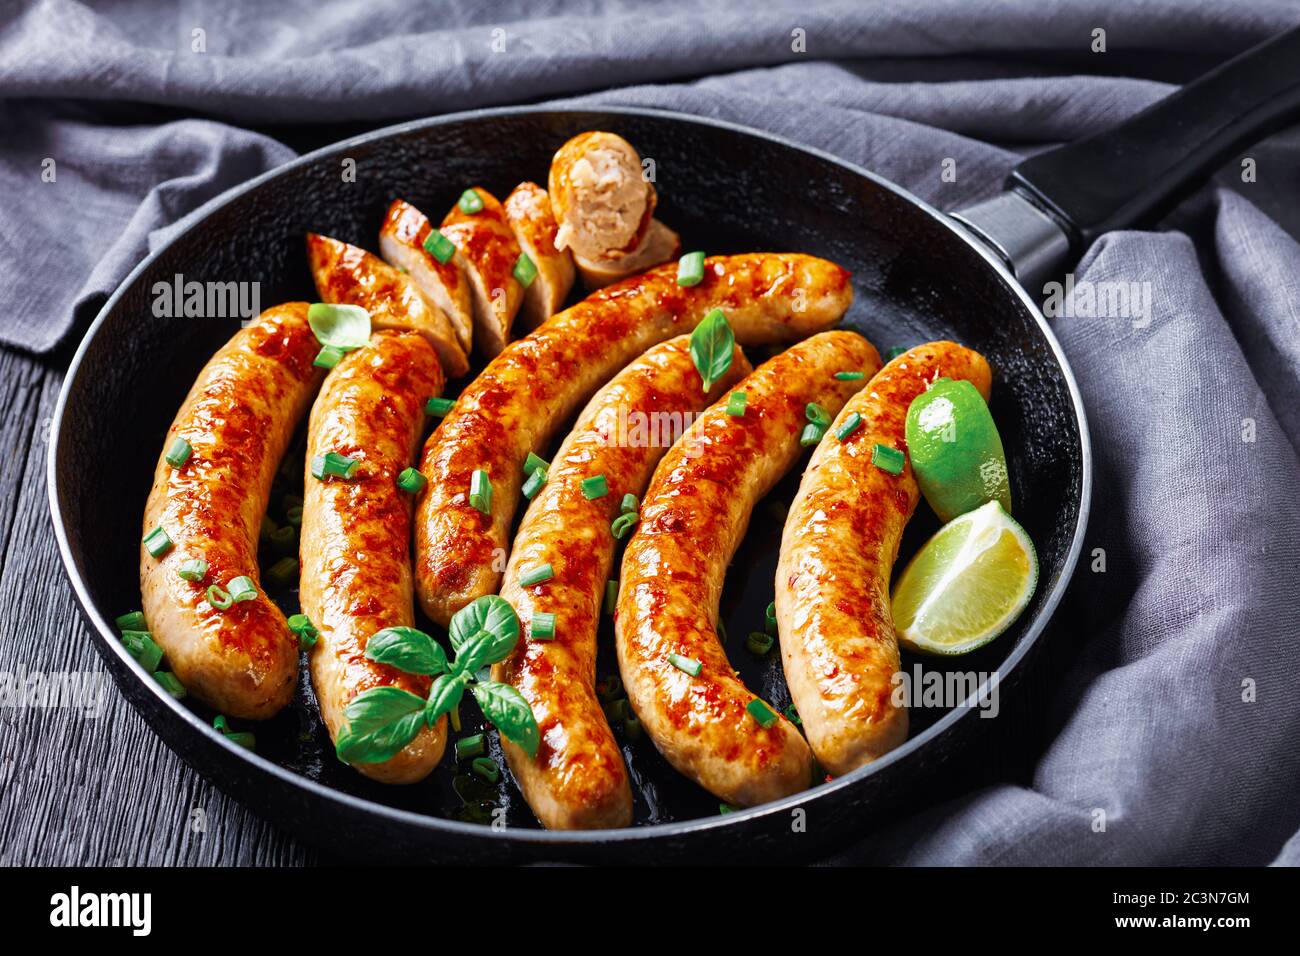 Homemade breakfast pork sausage links or patties fried in frying pan, served with fresh basil and spring onion served on a dark wooden background, lim Stock Photo